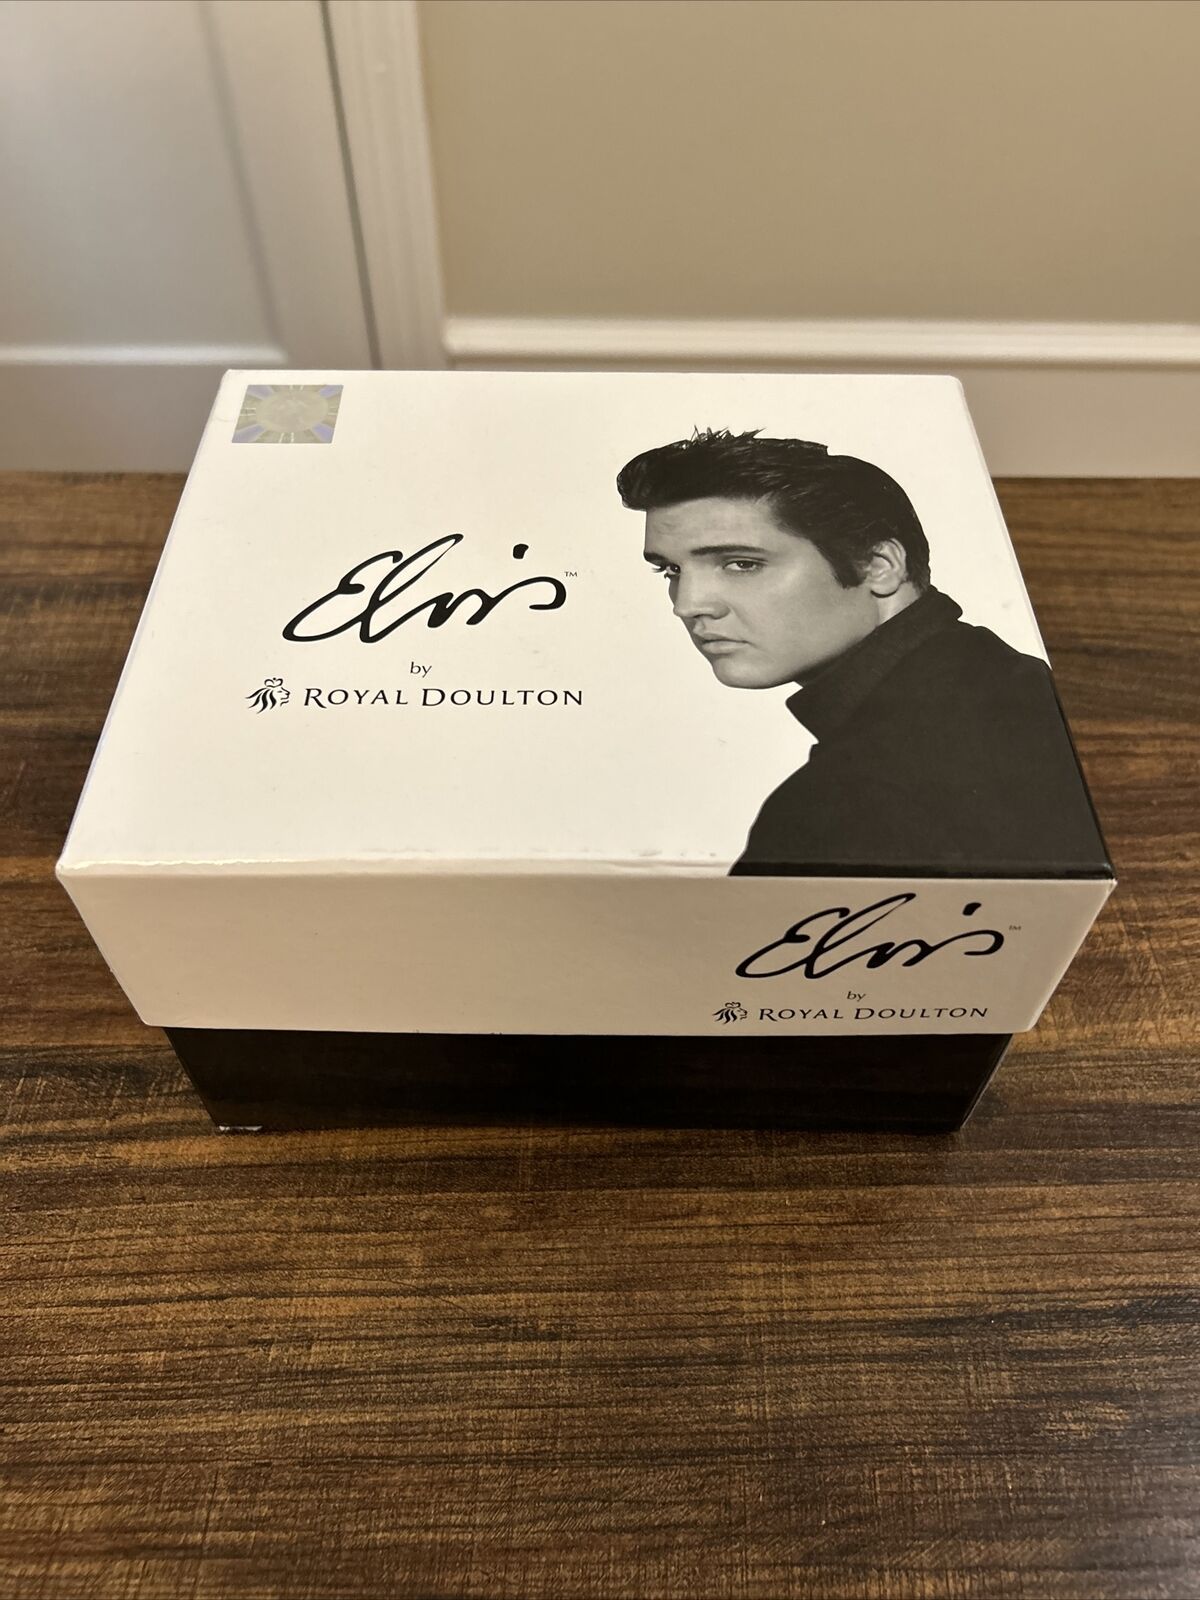 NEW IN BOX ROYAL DOULTON 30 YEAR COMMEMORATIVE ELVIS JAILHOUSE ROCK LARGE  EP14